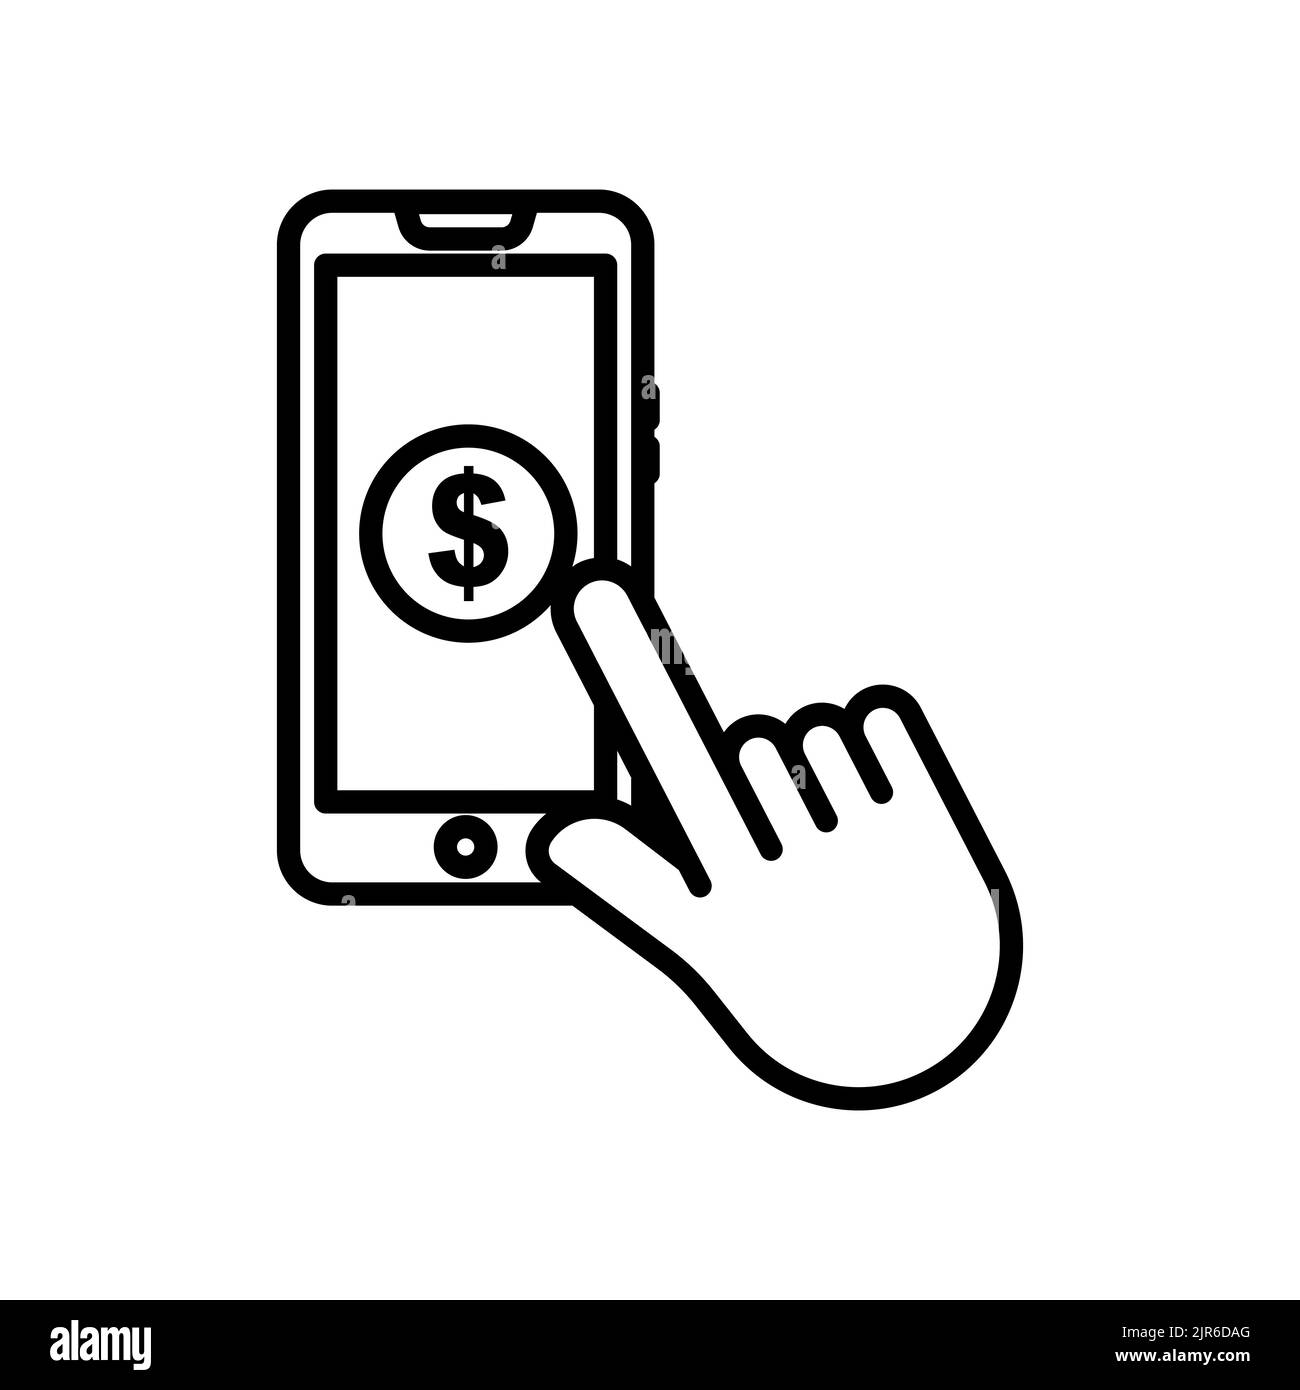 Hand touch icon with dollars in mobile phone . icon related to charity, business. Line icon style. Simple design editable Stock Vector